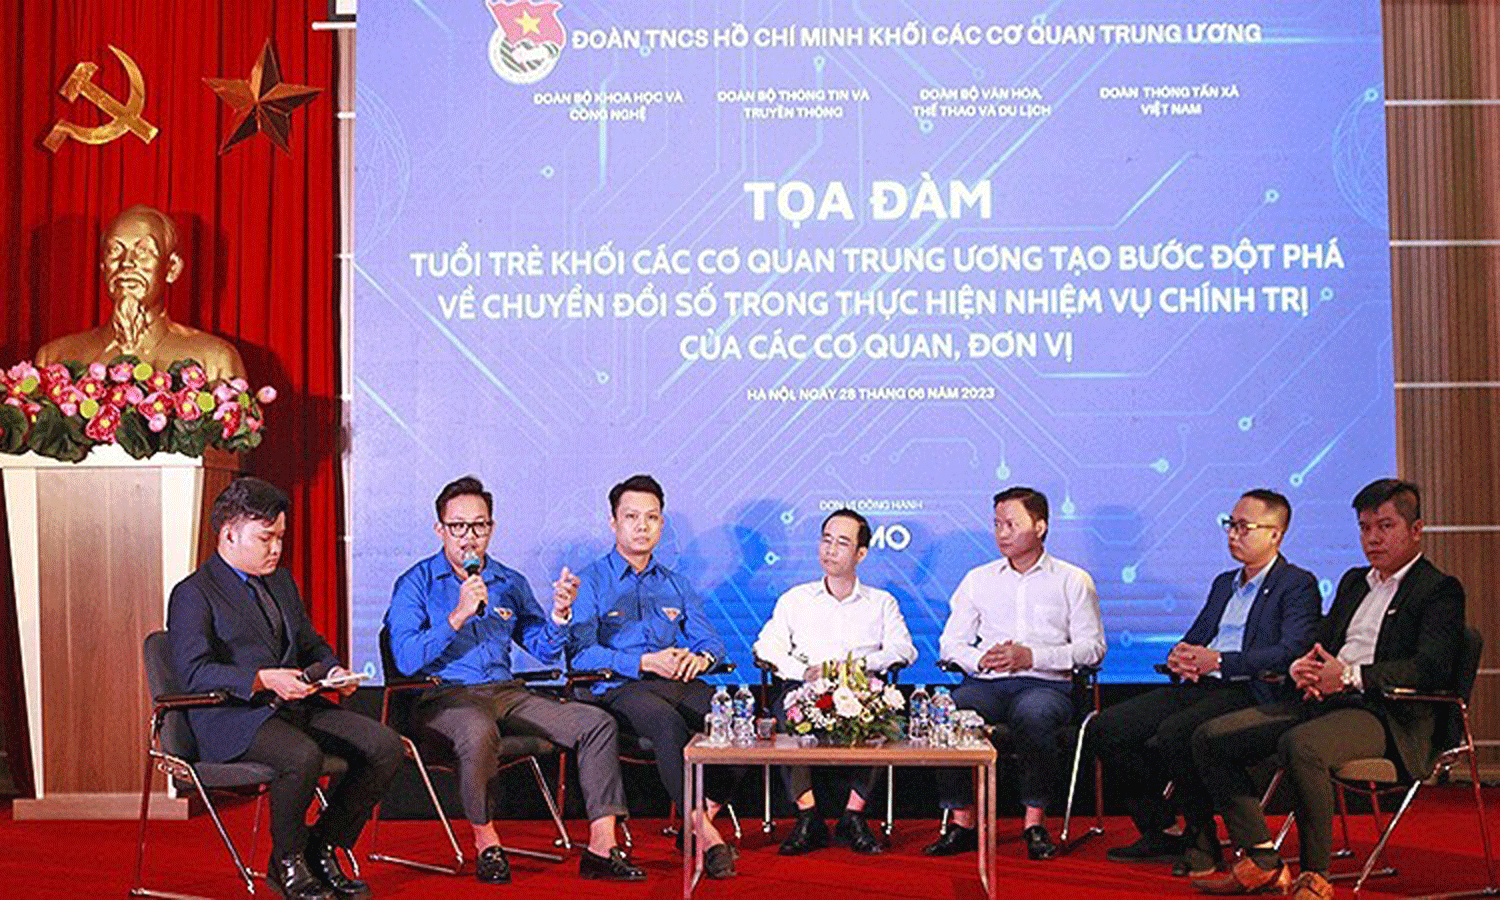 ABO/NDO-  June 28, the Youth Union of the Centrally-run Agencies Bloc held a seminar in Hanoi, under the theme ‘Youth of centrally-run agencies bloc make breakthroughs in digital transformations to realise their assigned tasks’.